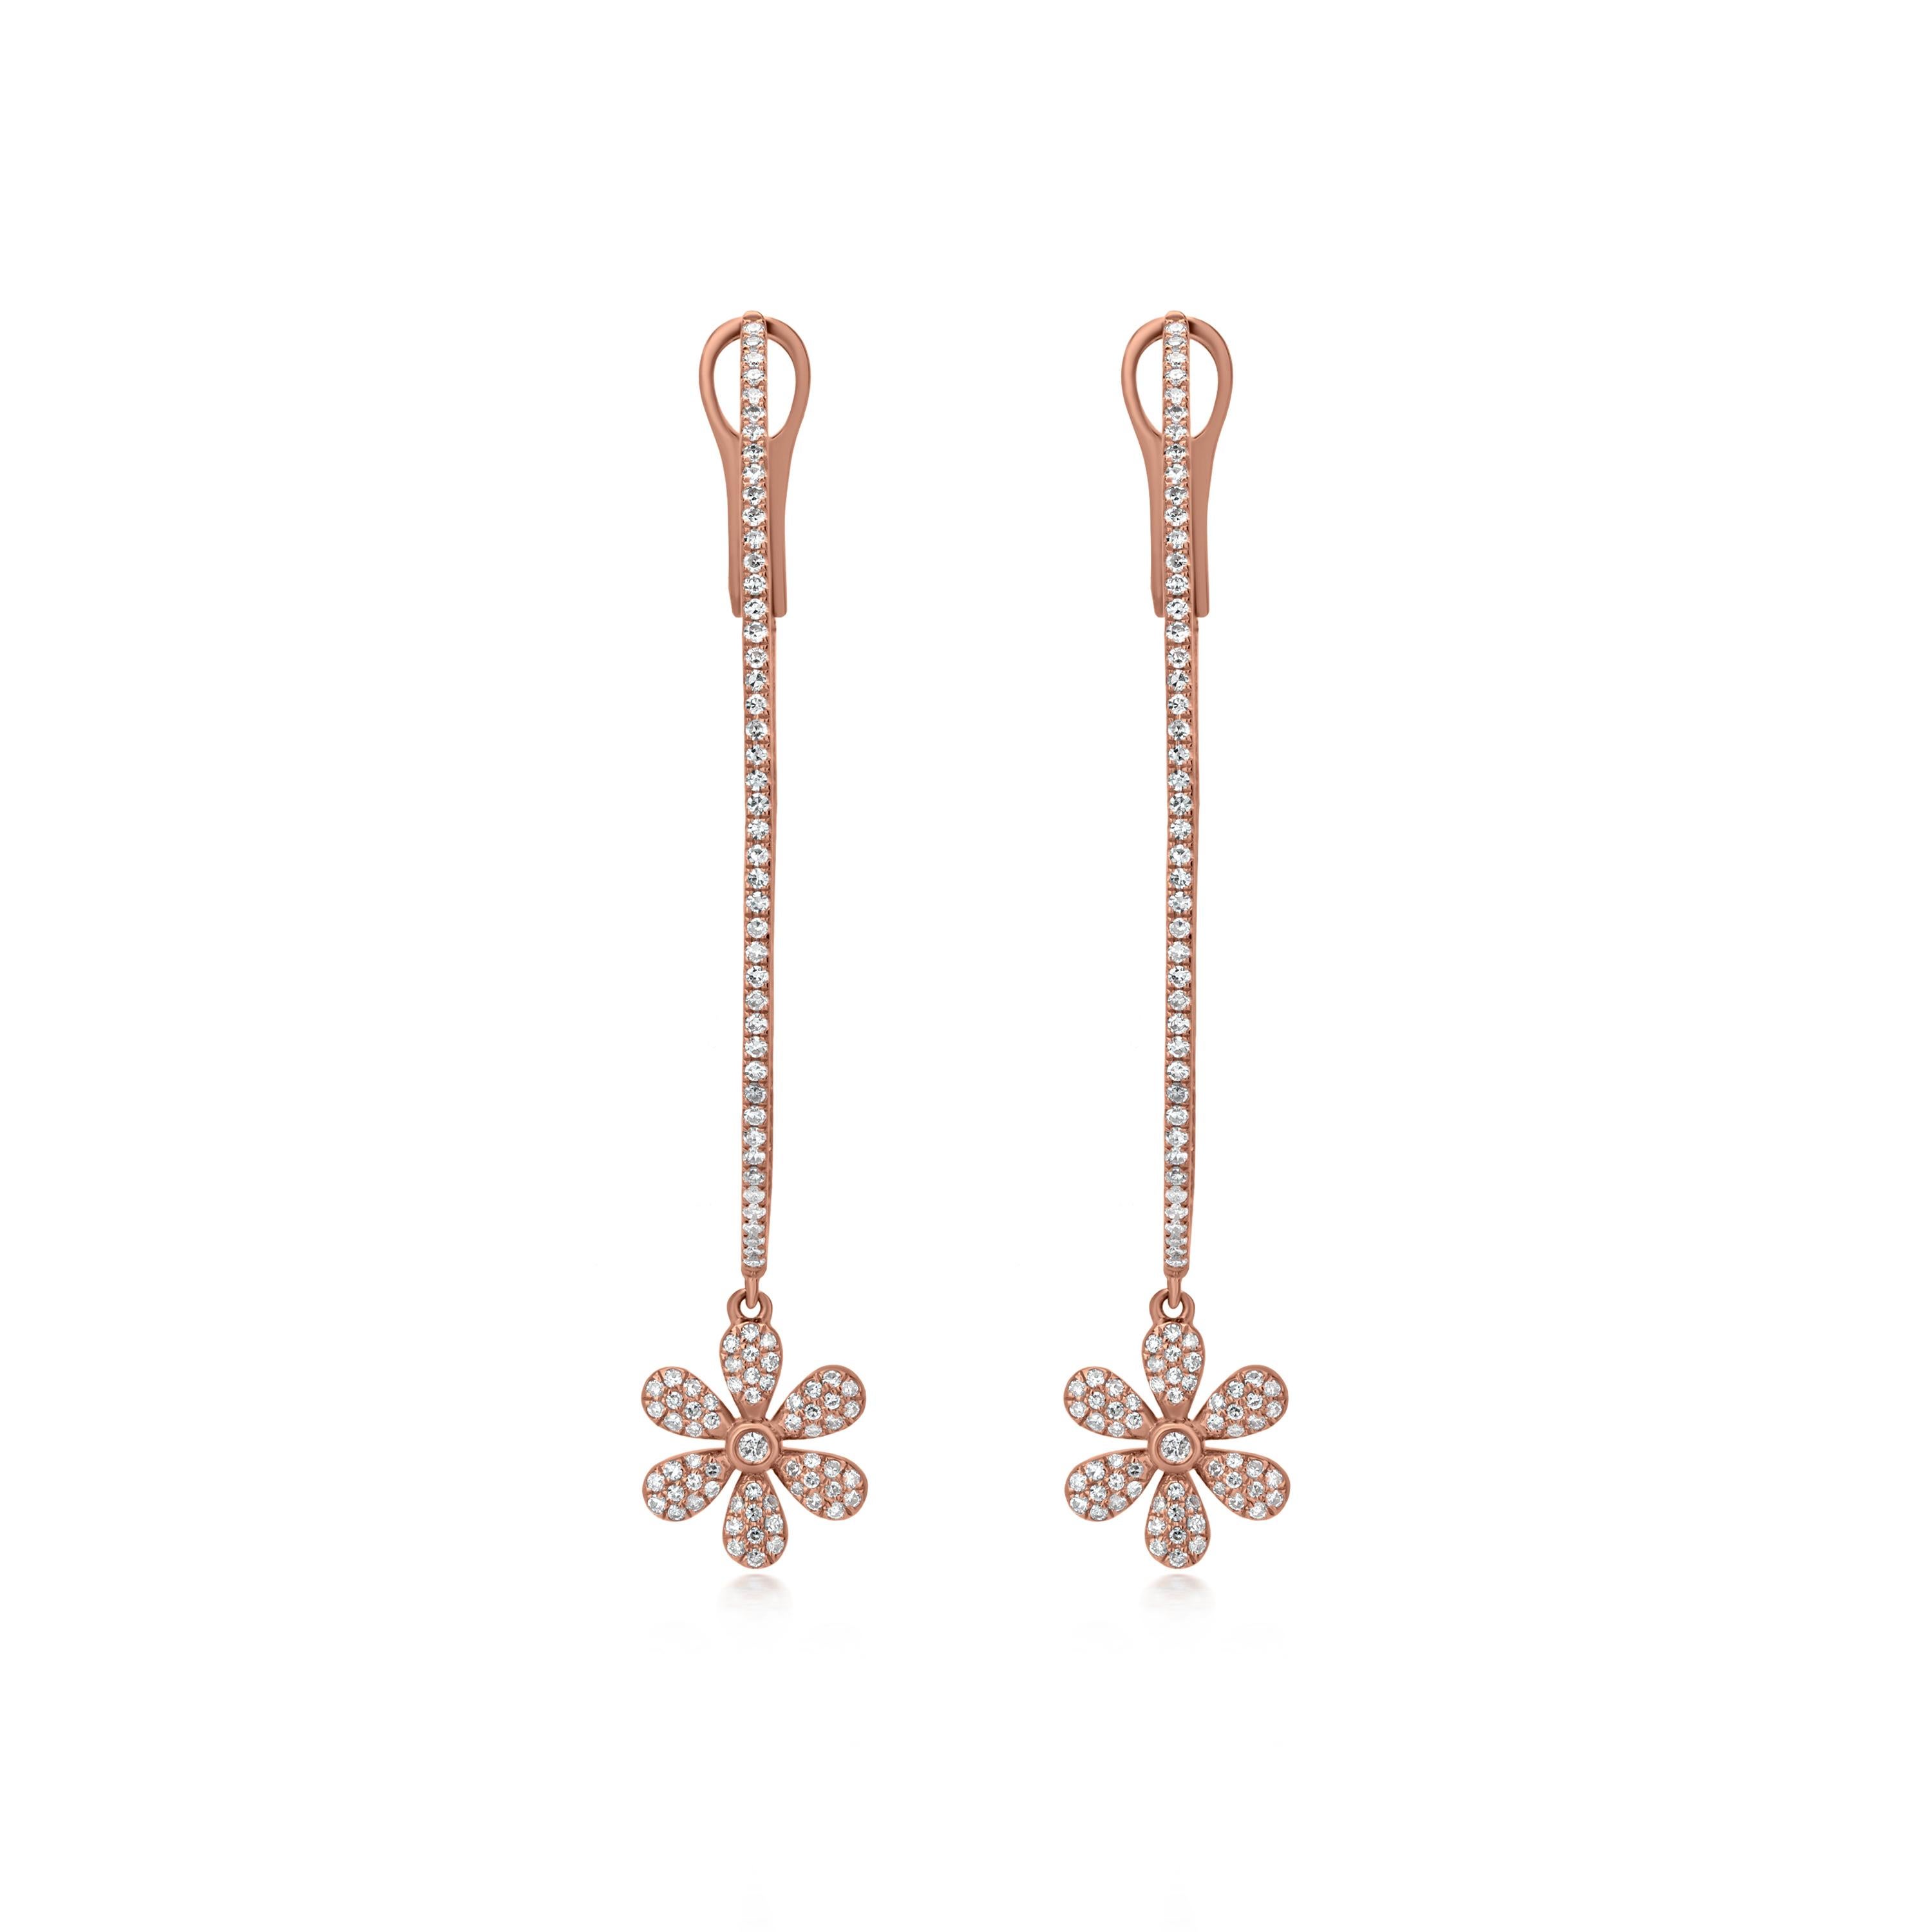 A stunning pair of Luxle 14k rose gold hoop earrings aligned with 266 pave round diamonds adorning inside and outside, as well as a gorgeous flower motif totaling 0.86 carats of diamonds framed within pave set, it has come with omega backs. The